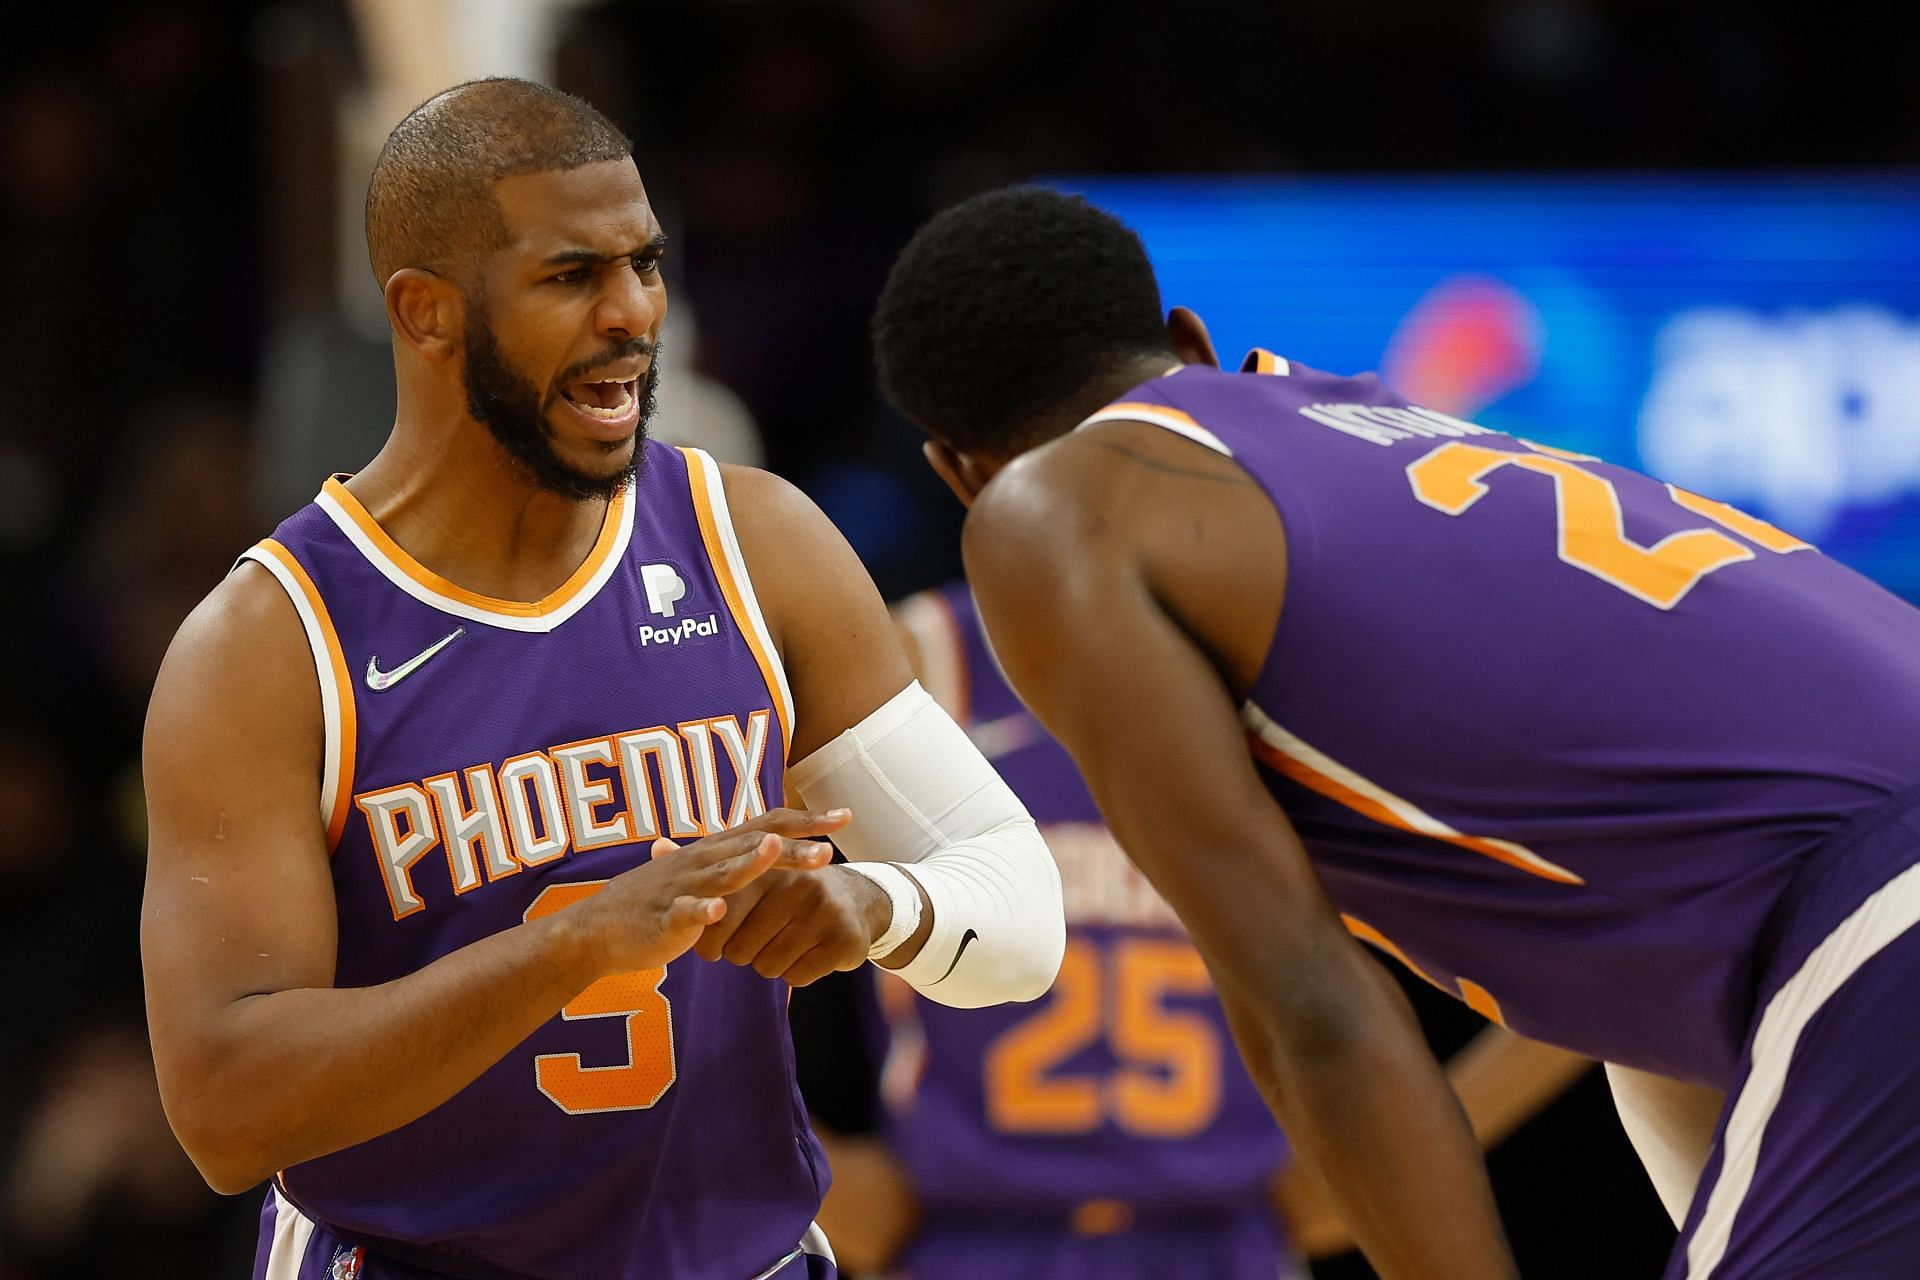 Chris Paul of the Phoenix Suns reacts after an injury to his hand